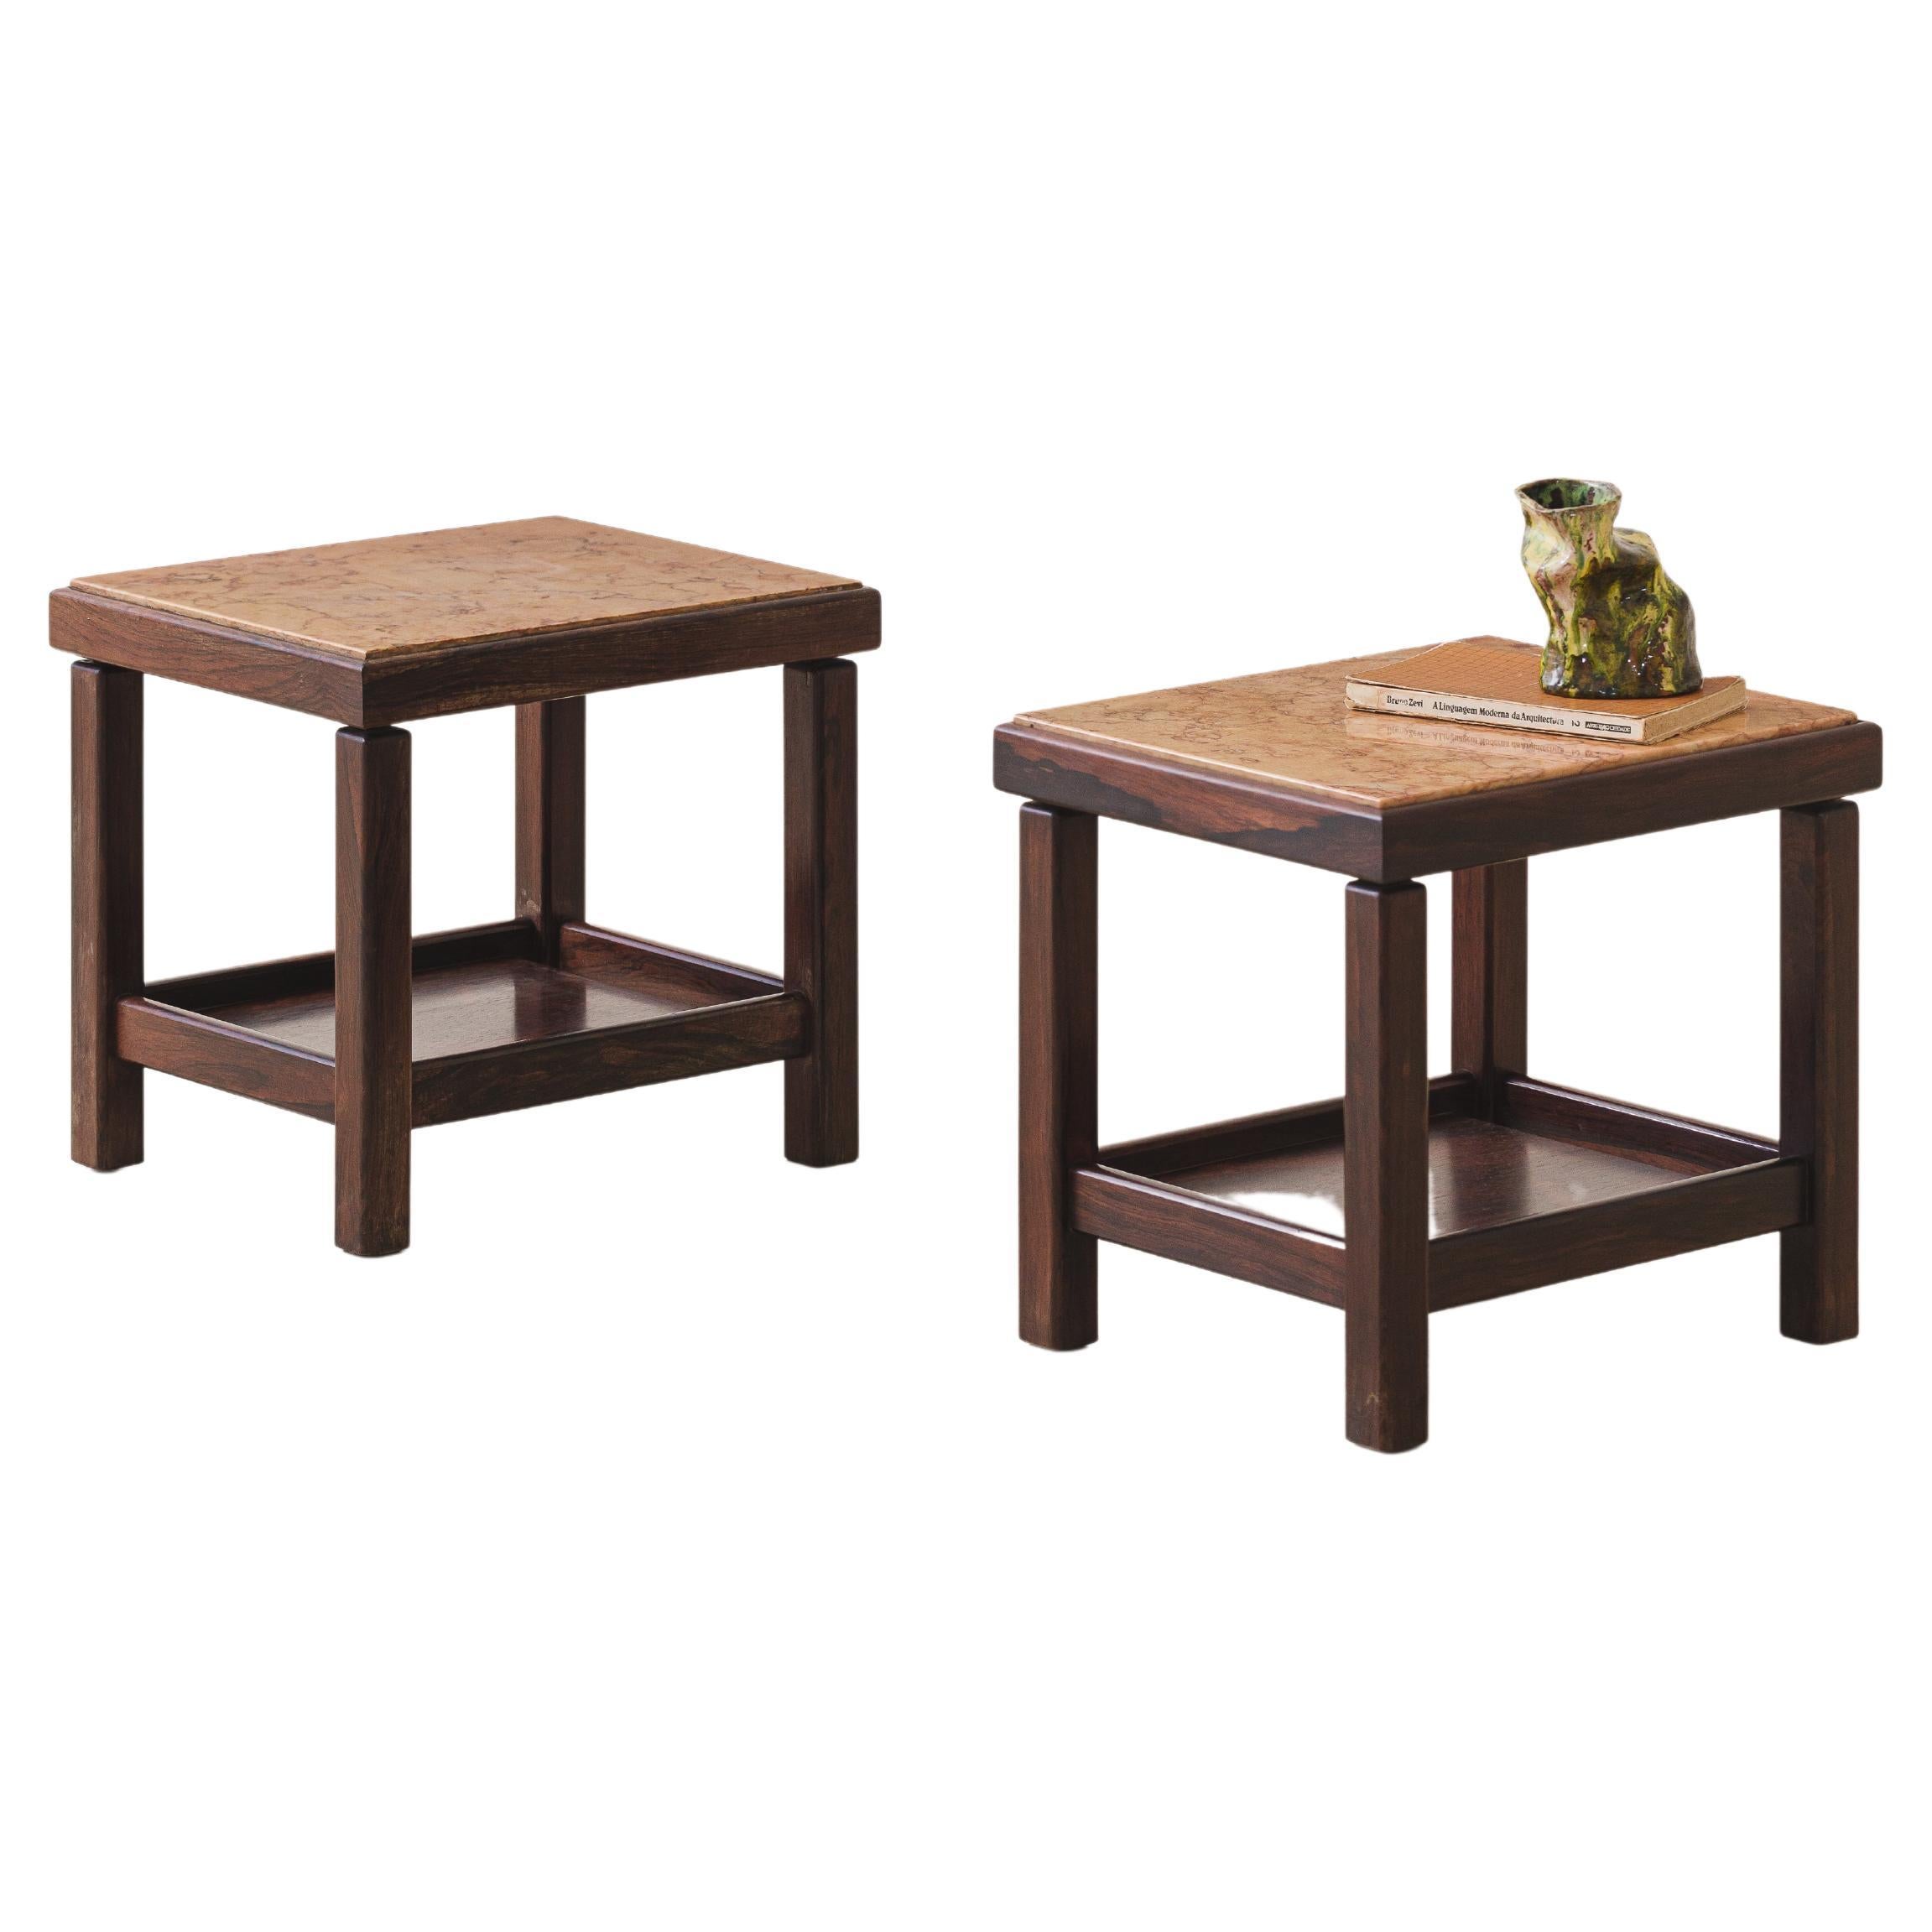 Pair of Rosewood and Marble Side Tables, Design by Unknown Artist, Brazil, 1960s For Sale